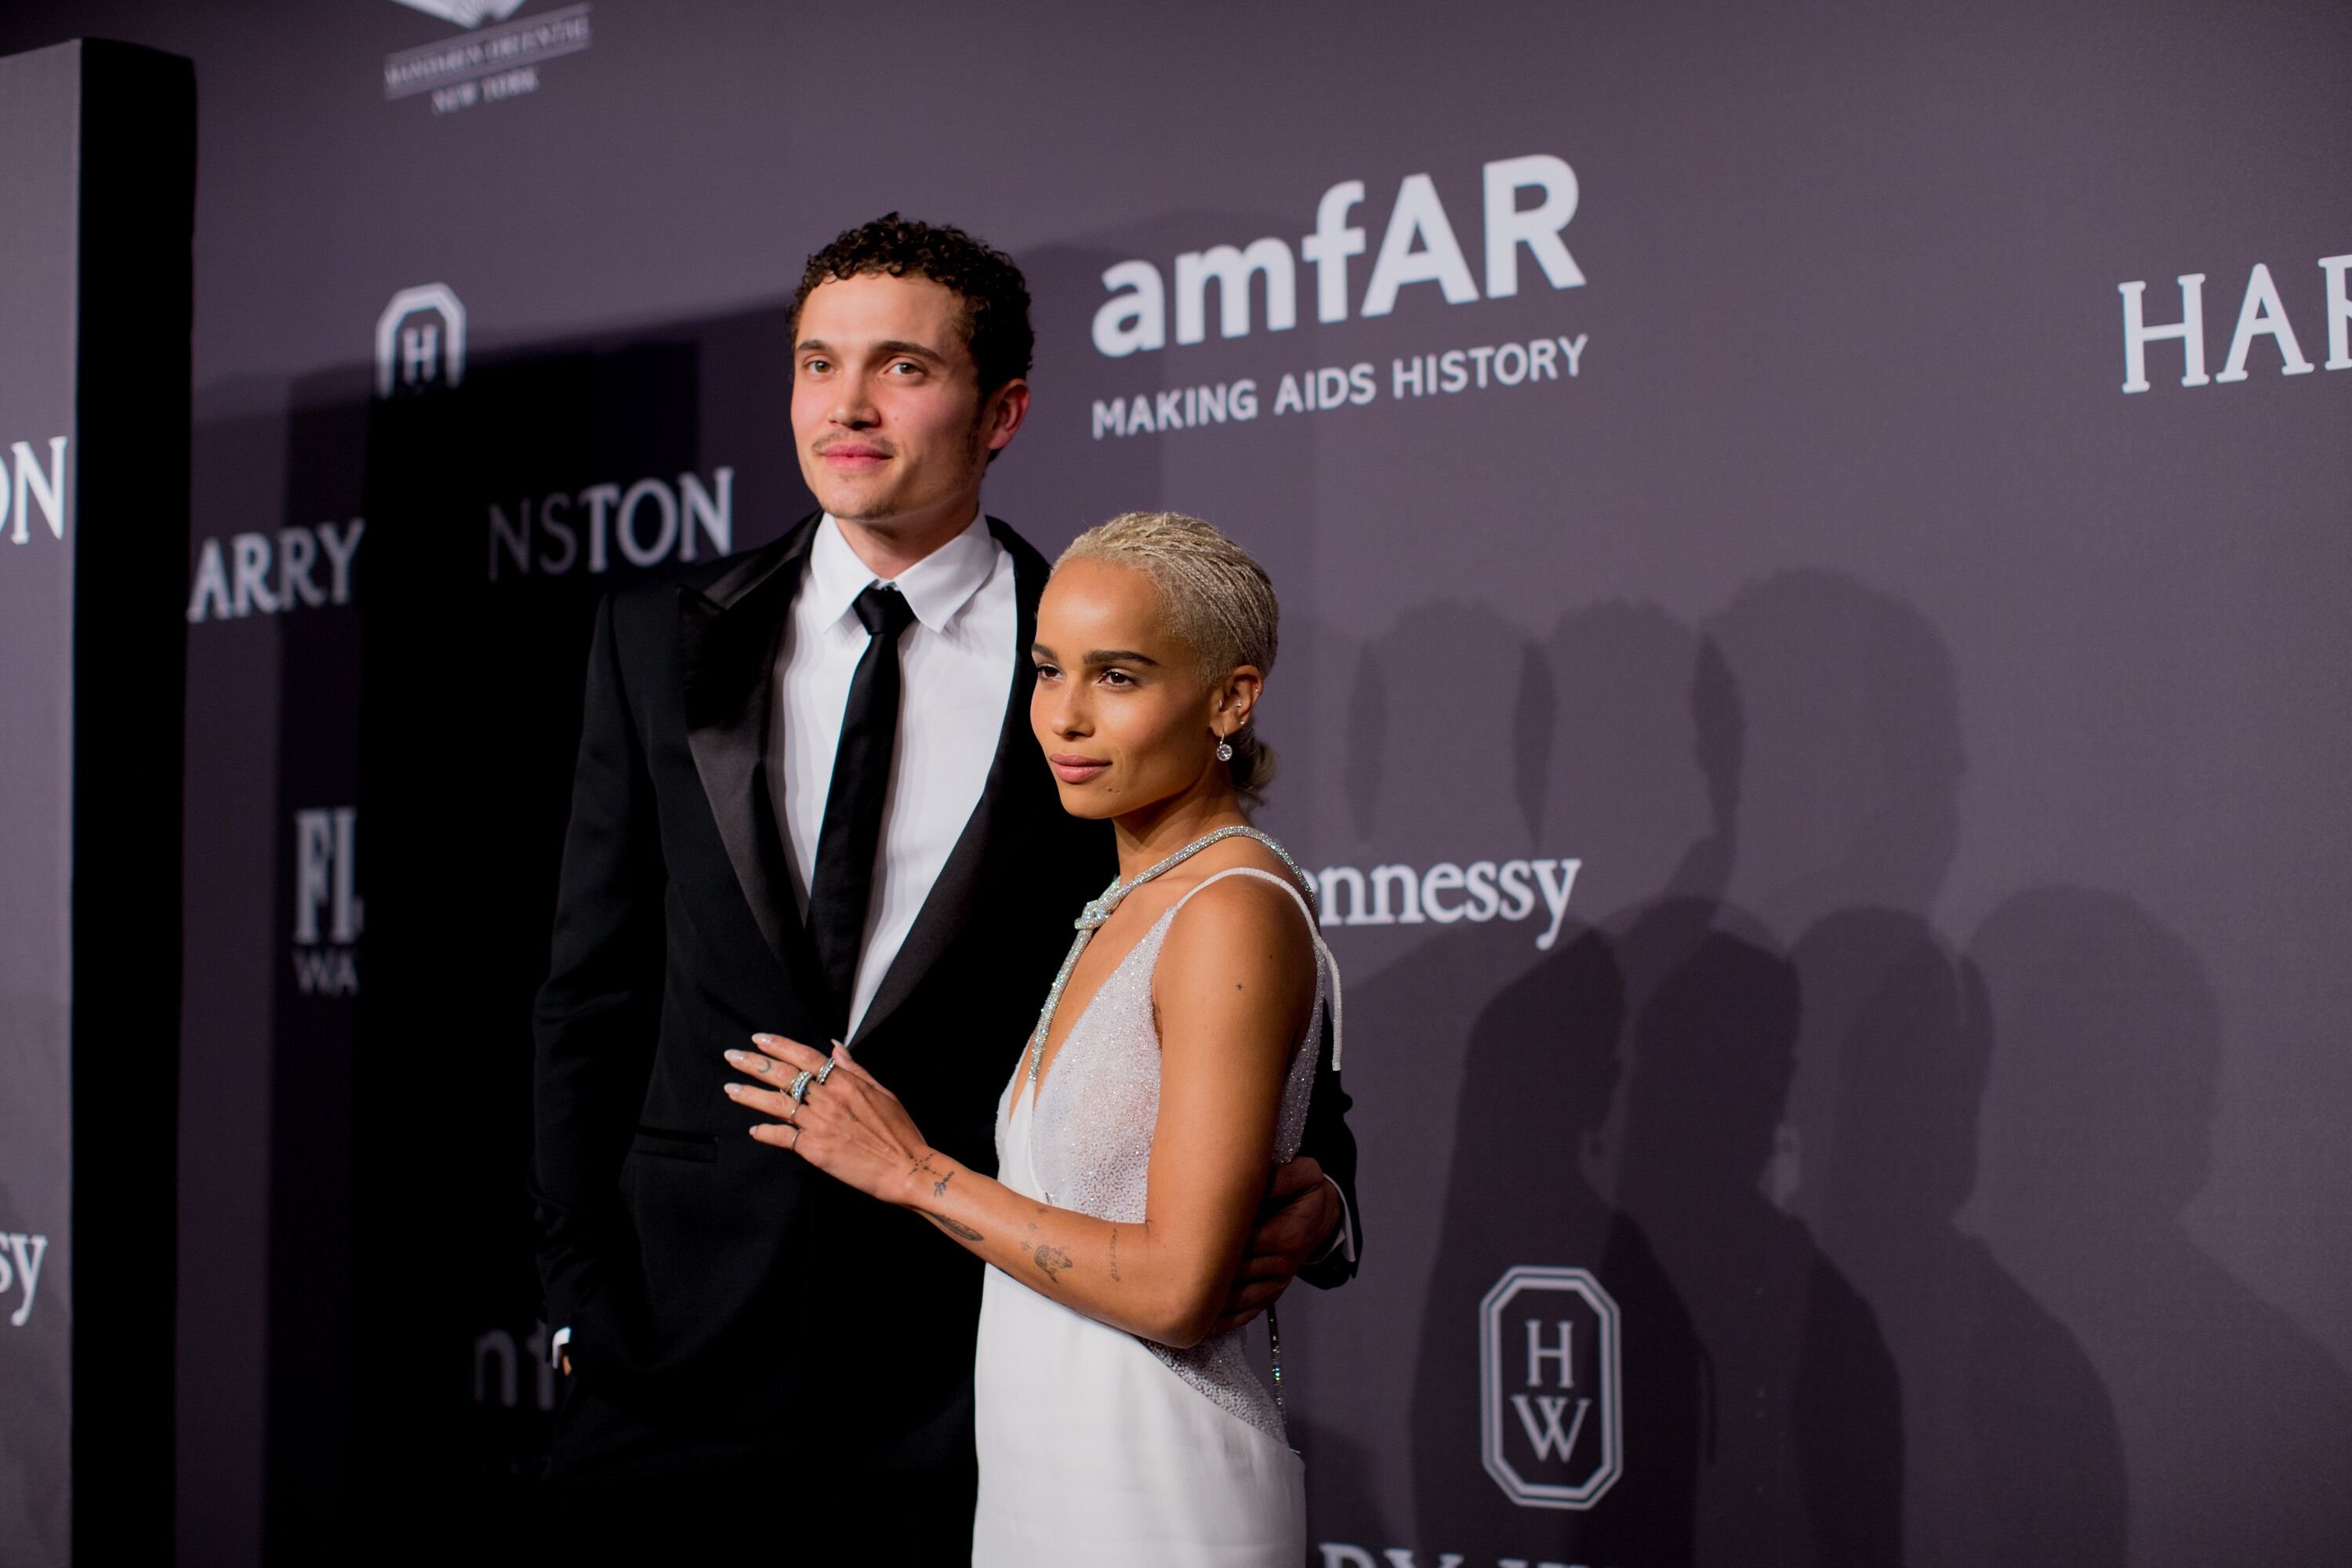 Karl Glusman and Zoe Kravitz at Cipriani Wall Street on February 8, 2017 | Photo: Getty Images